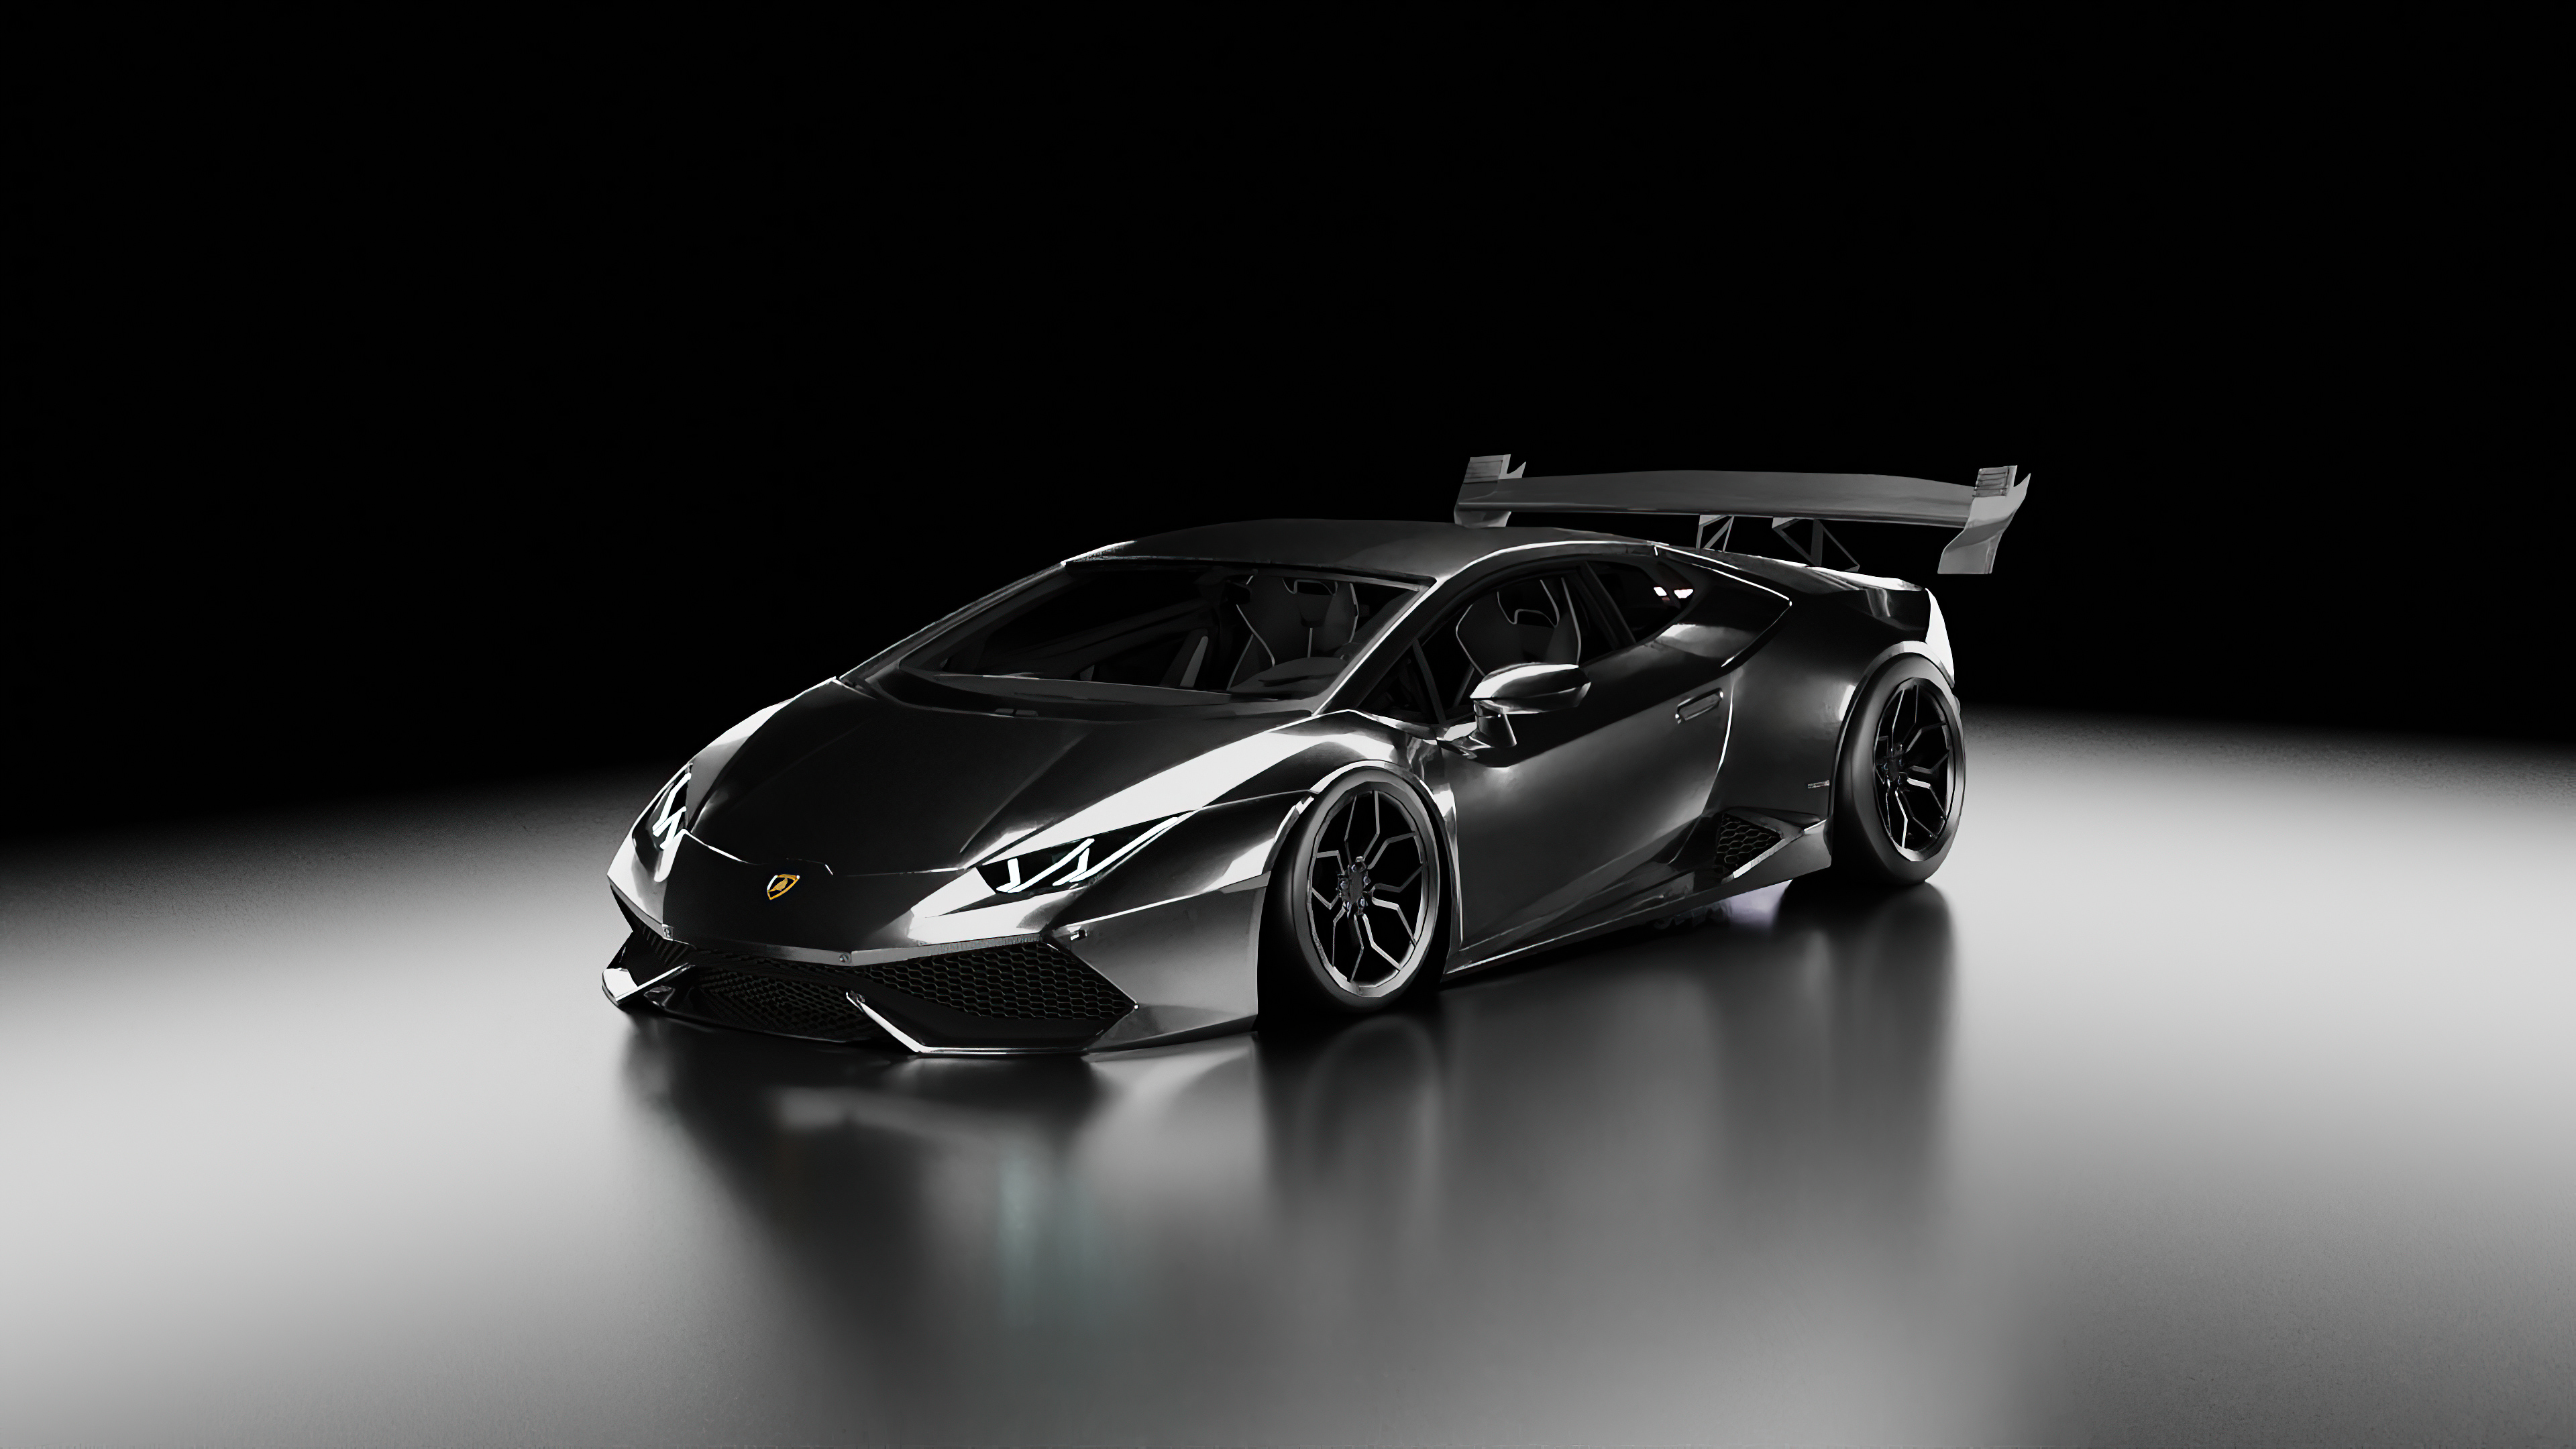 Lamborghini Huracan Black, HD Cars, 4k Wallpapers, Images, Backgrounds,  Photos and Pictures